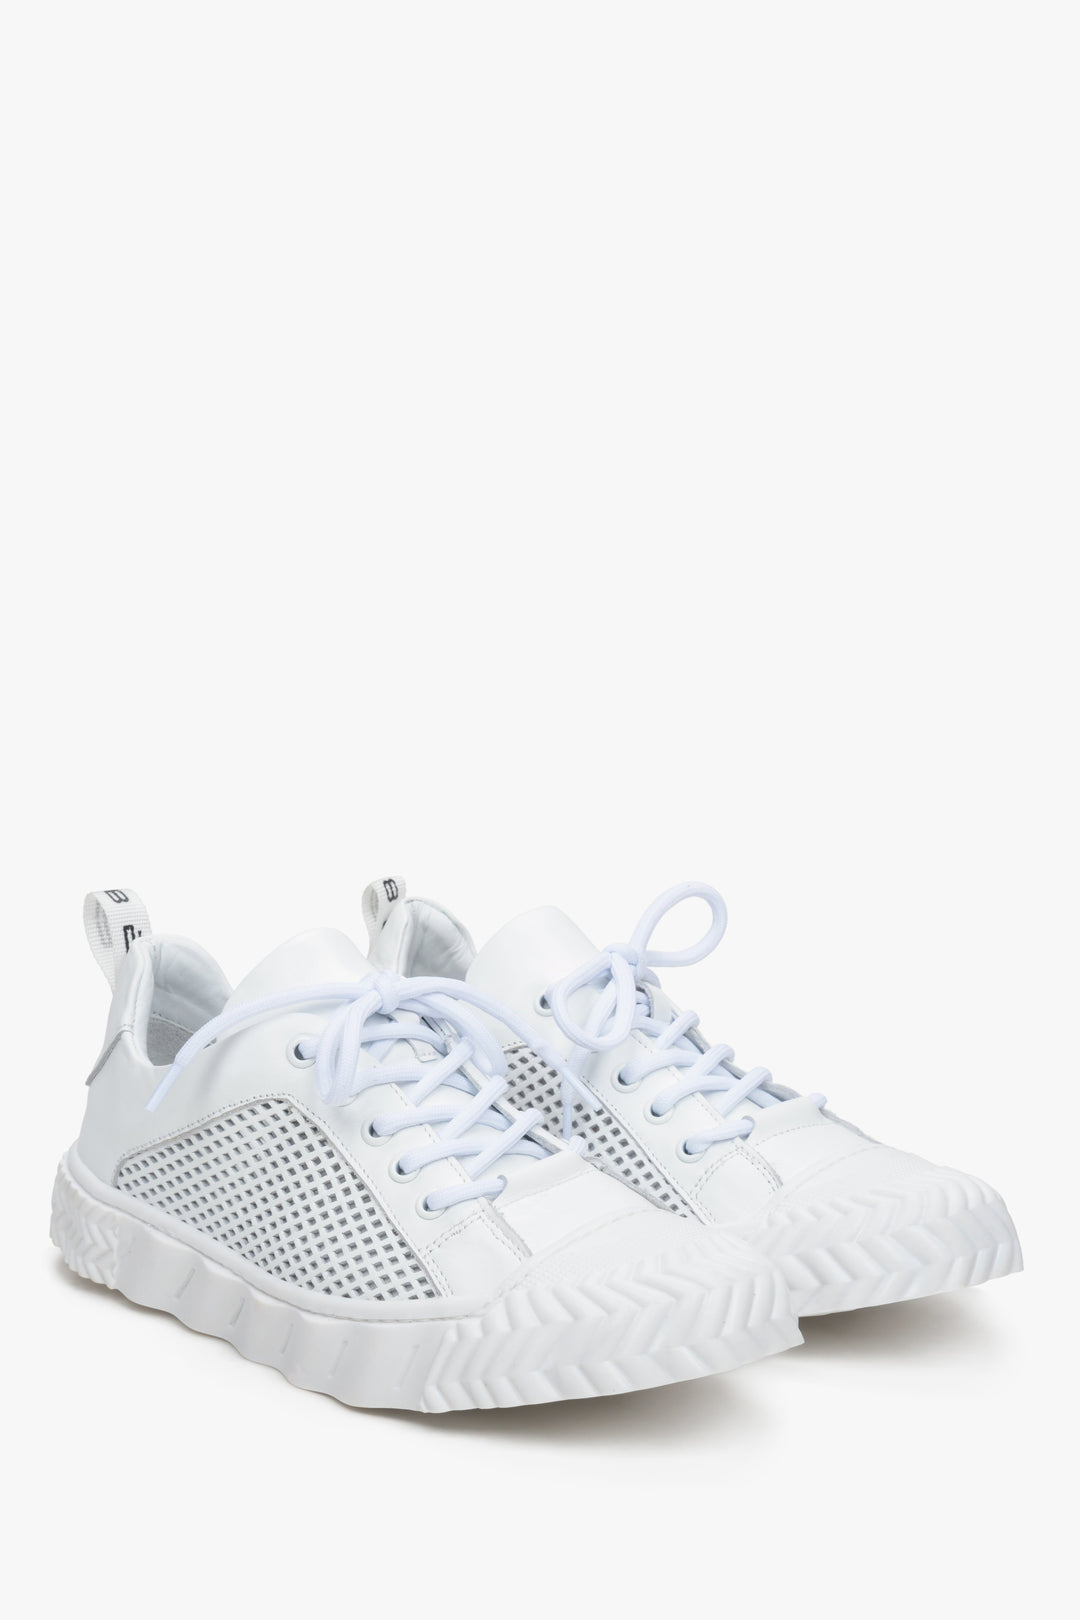 Women's white ES 8 sneakers with laces and elevated sole.